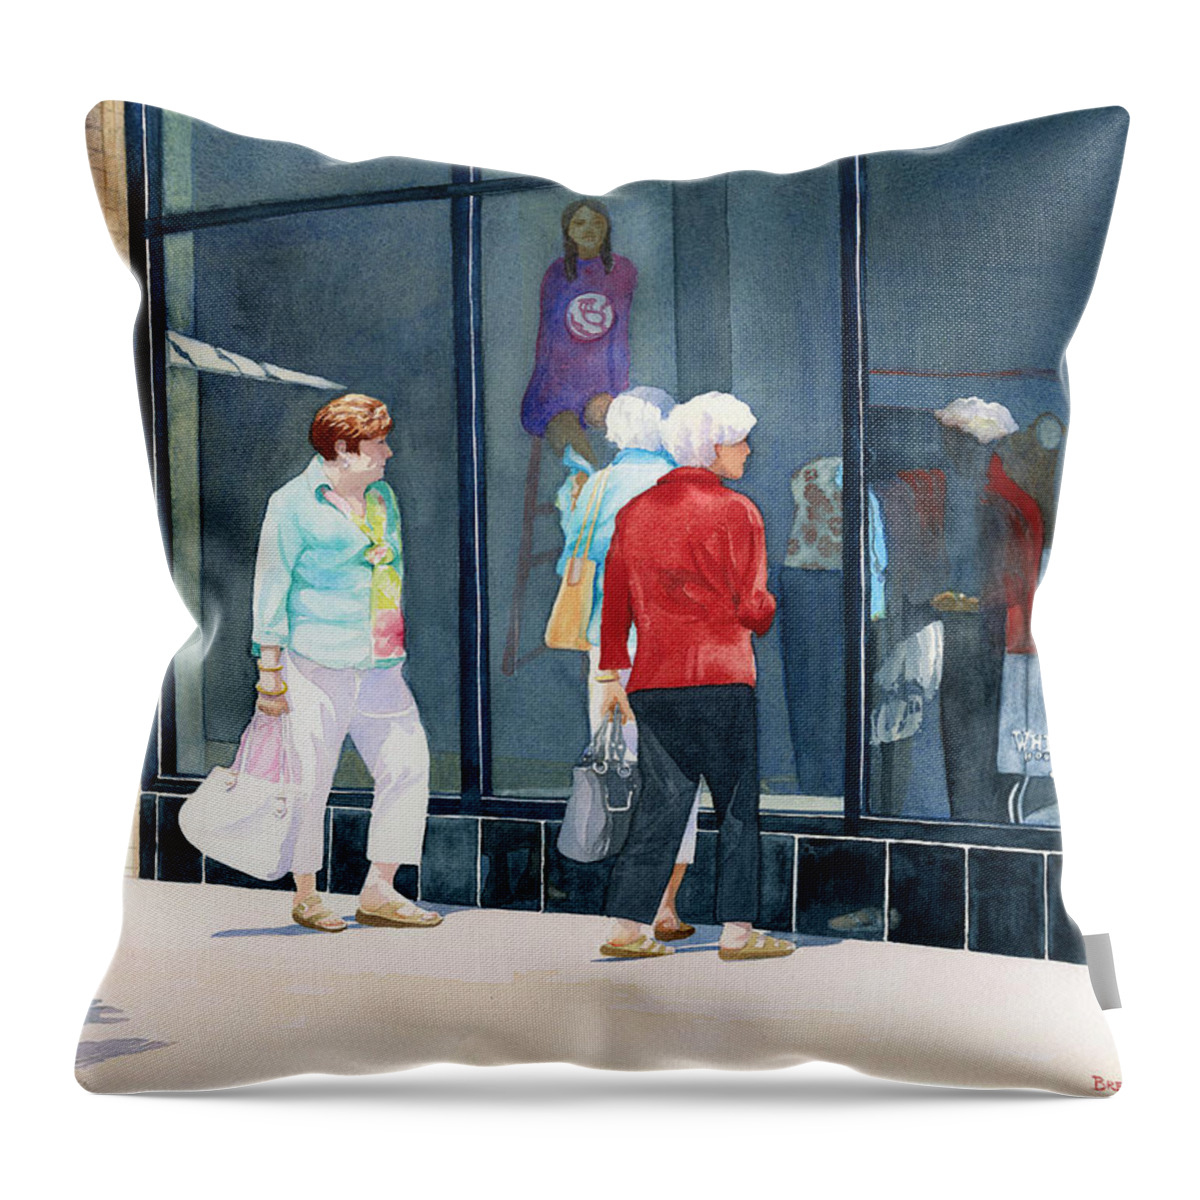 Shopping Throw Pillow featuring the painting The Window Shoppers by Brenda Beck Fisher